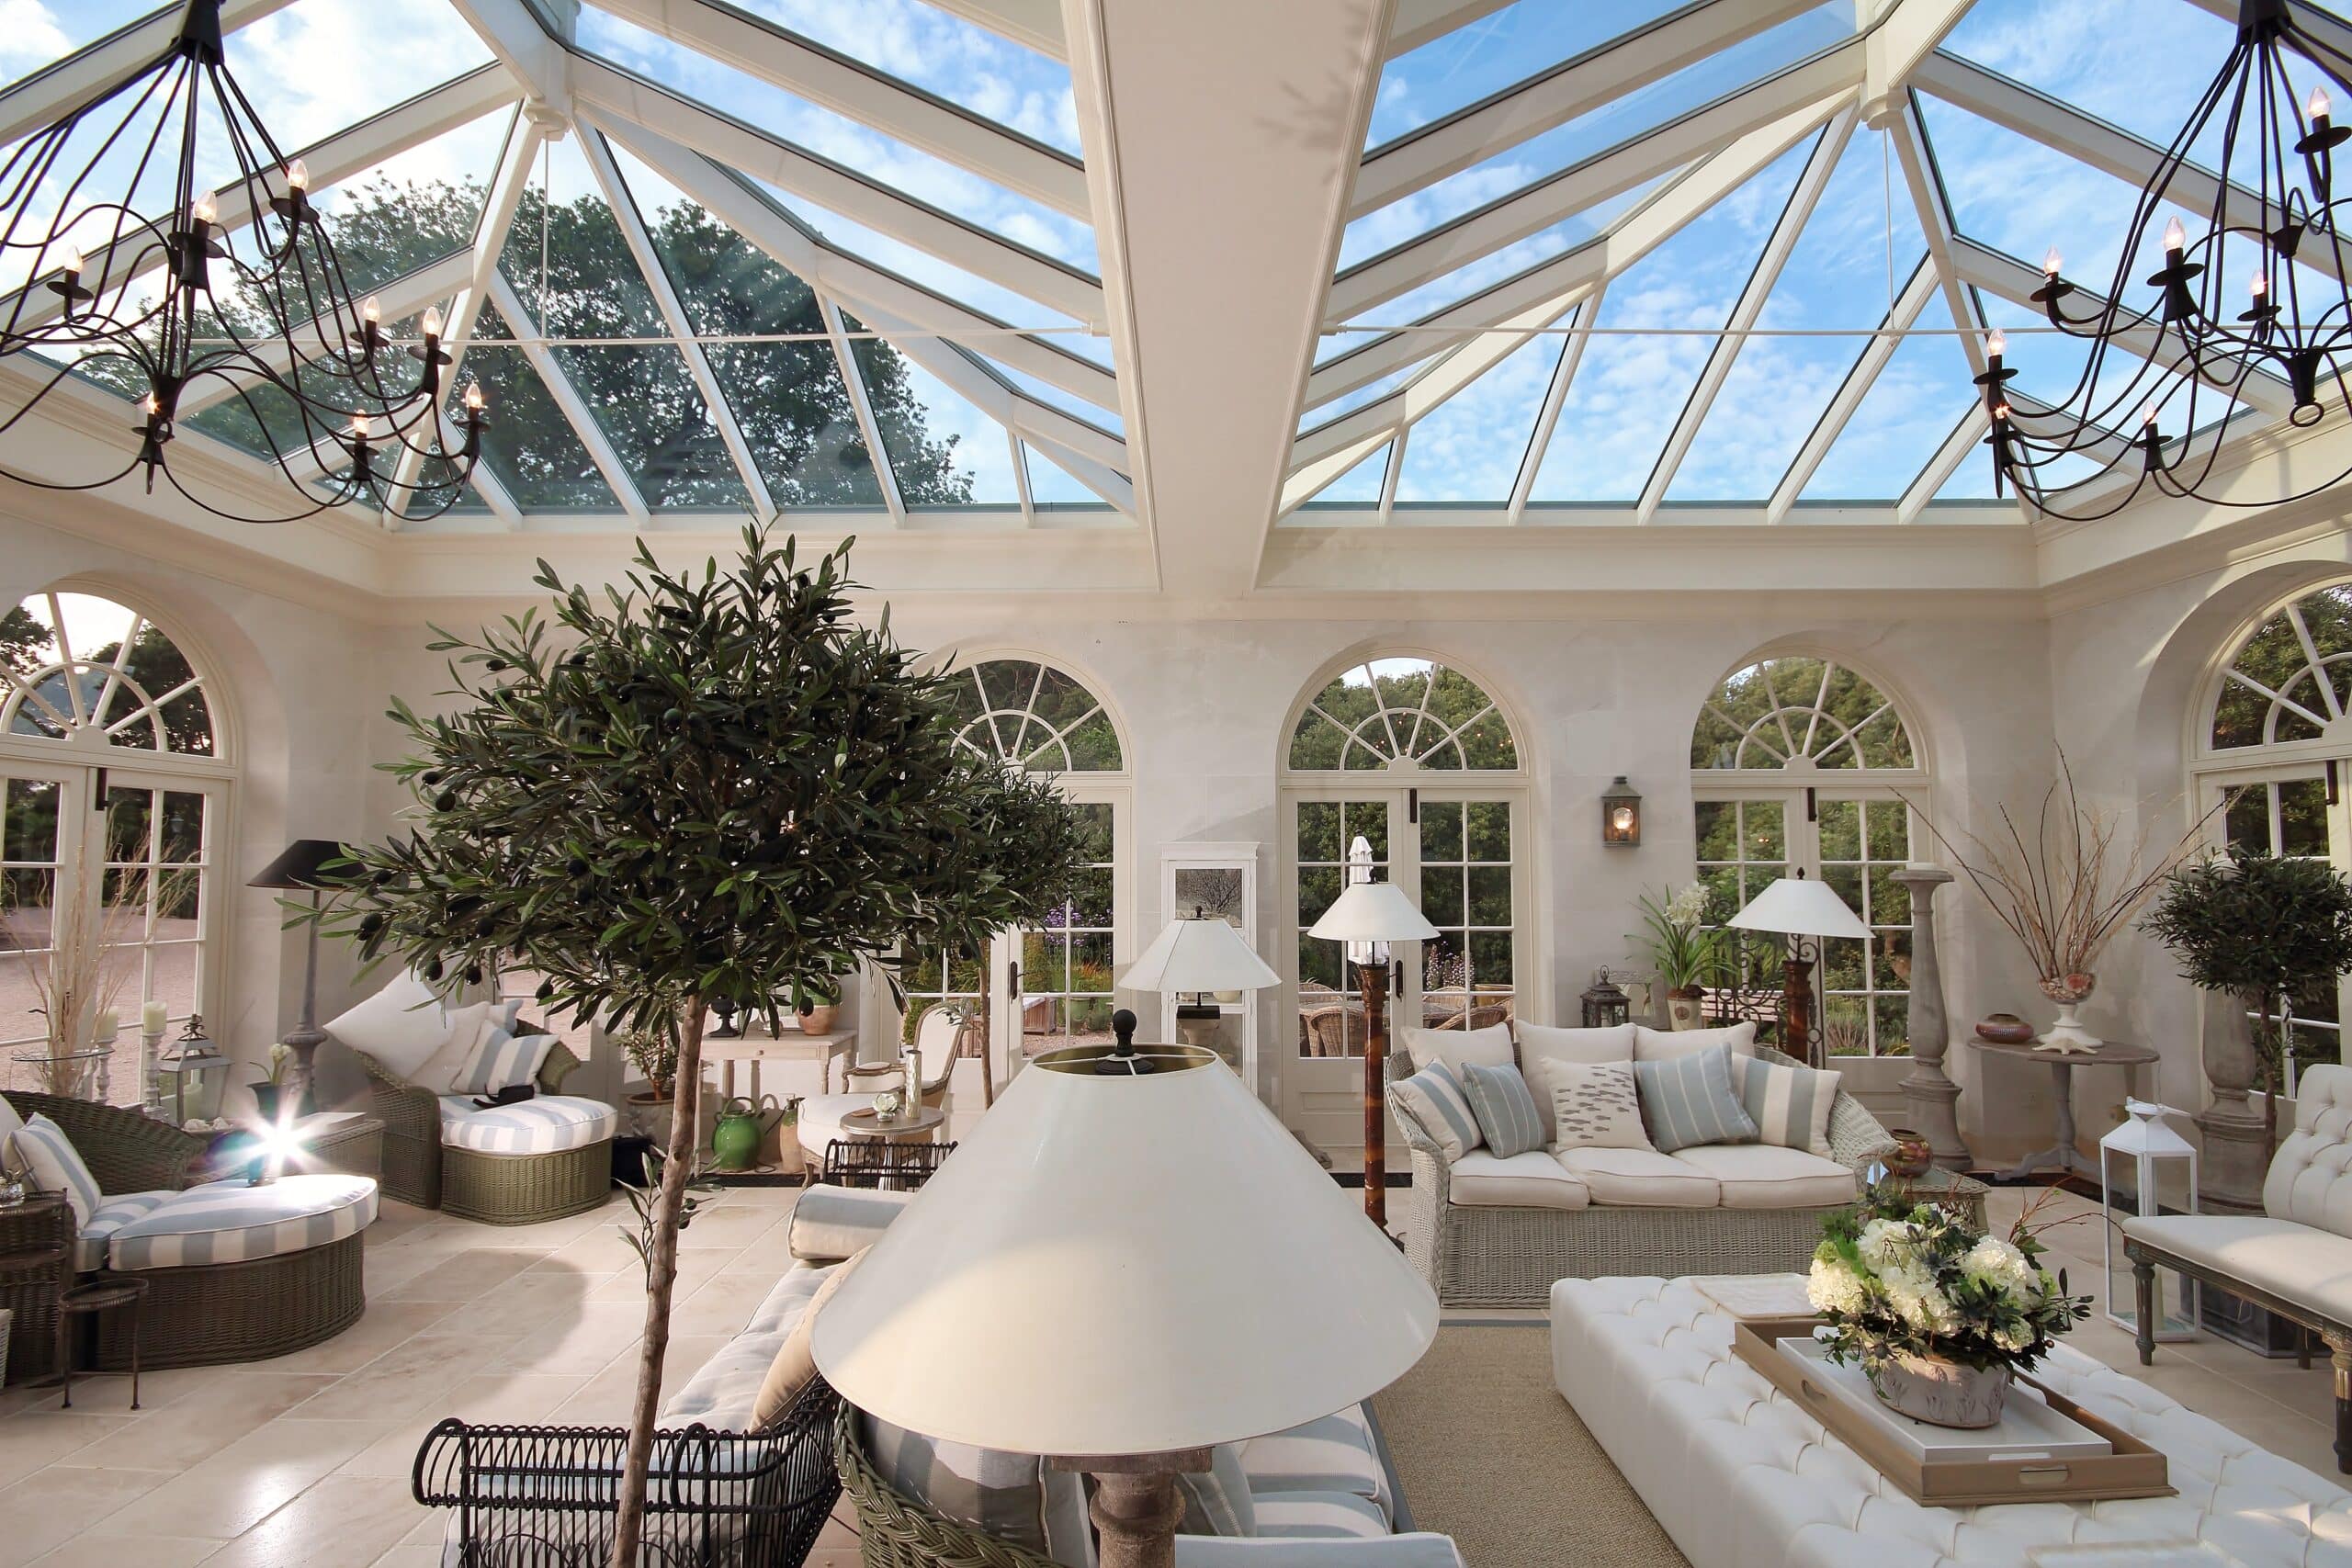 Featured image for “Images of orangeries”